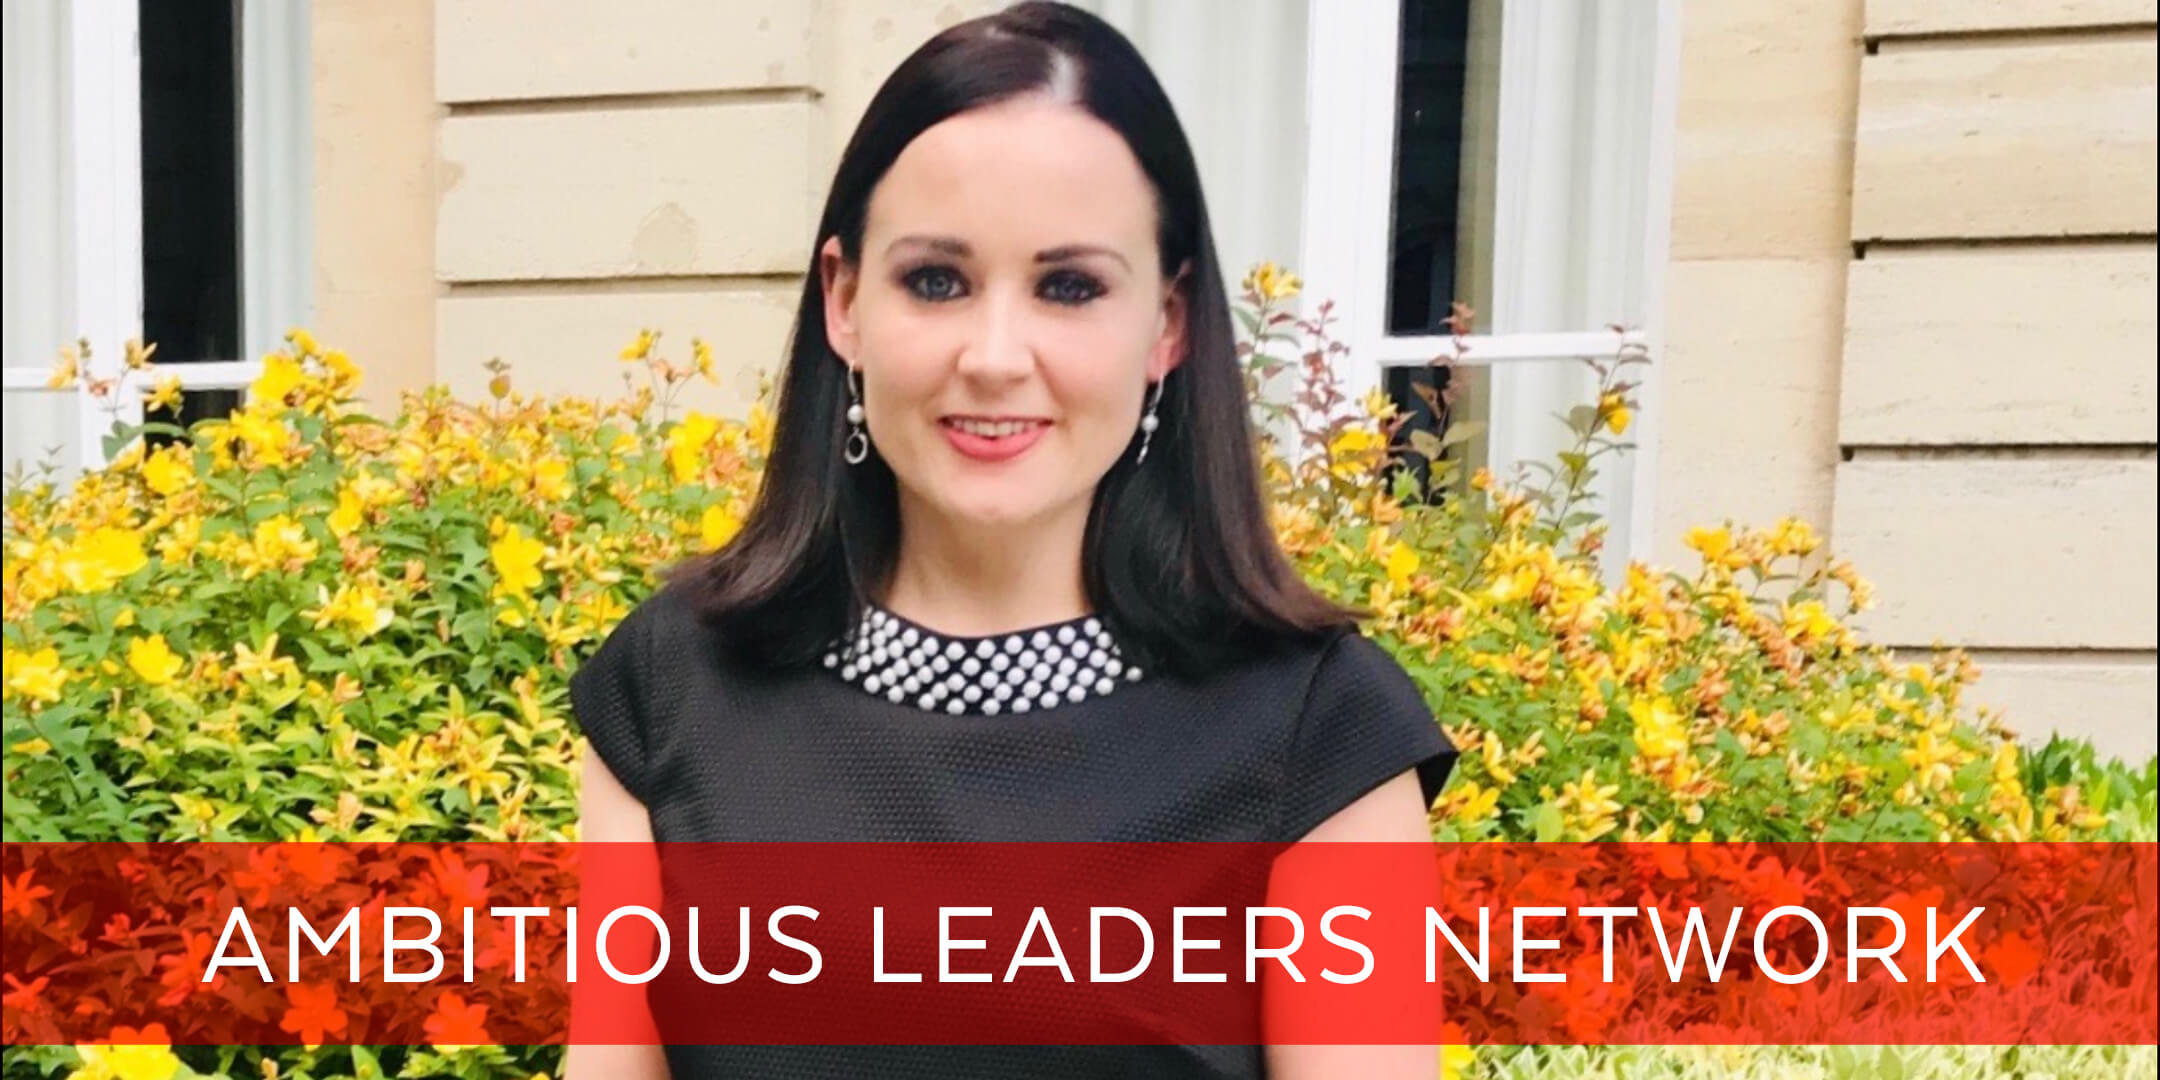 Natalie Flynn - Speaker At The Ambitious Leaders Network